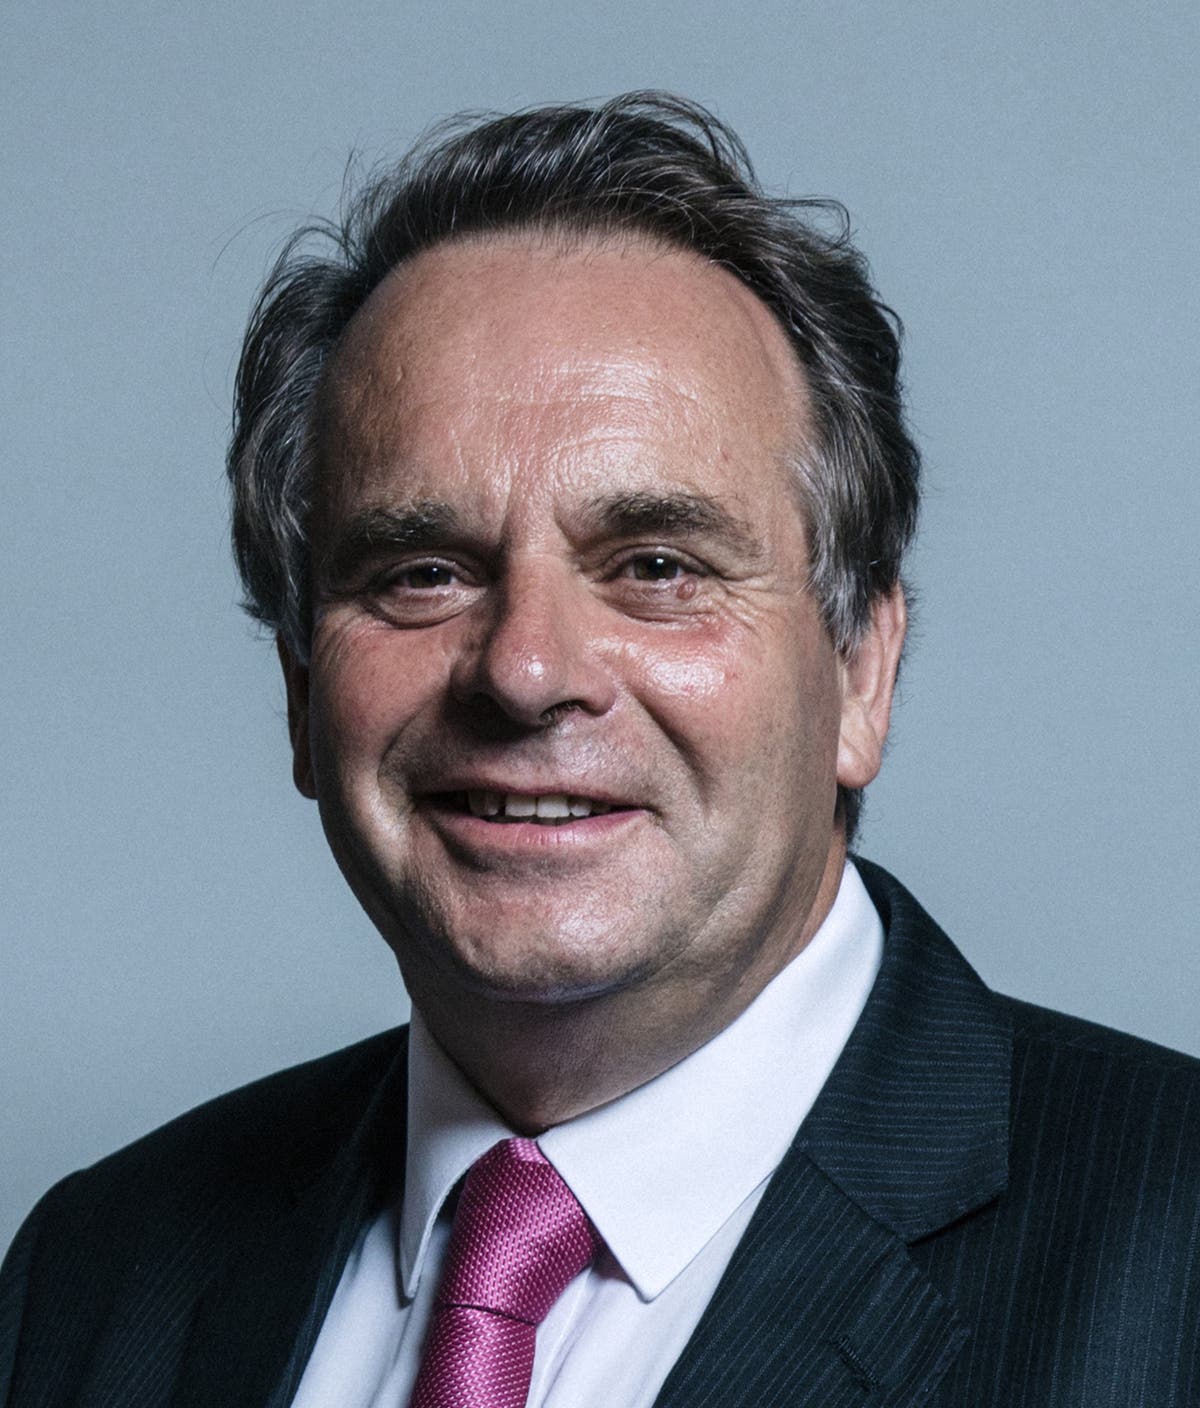 PM must face reality after by-election defeat, disgraced ex-MP Neil Parish says